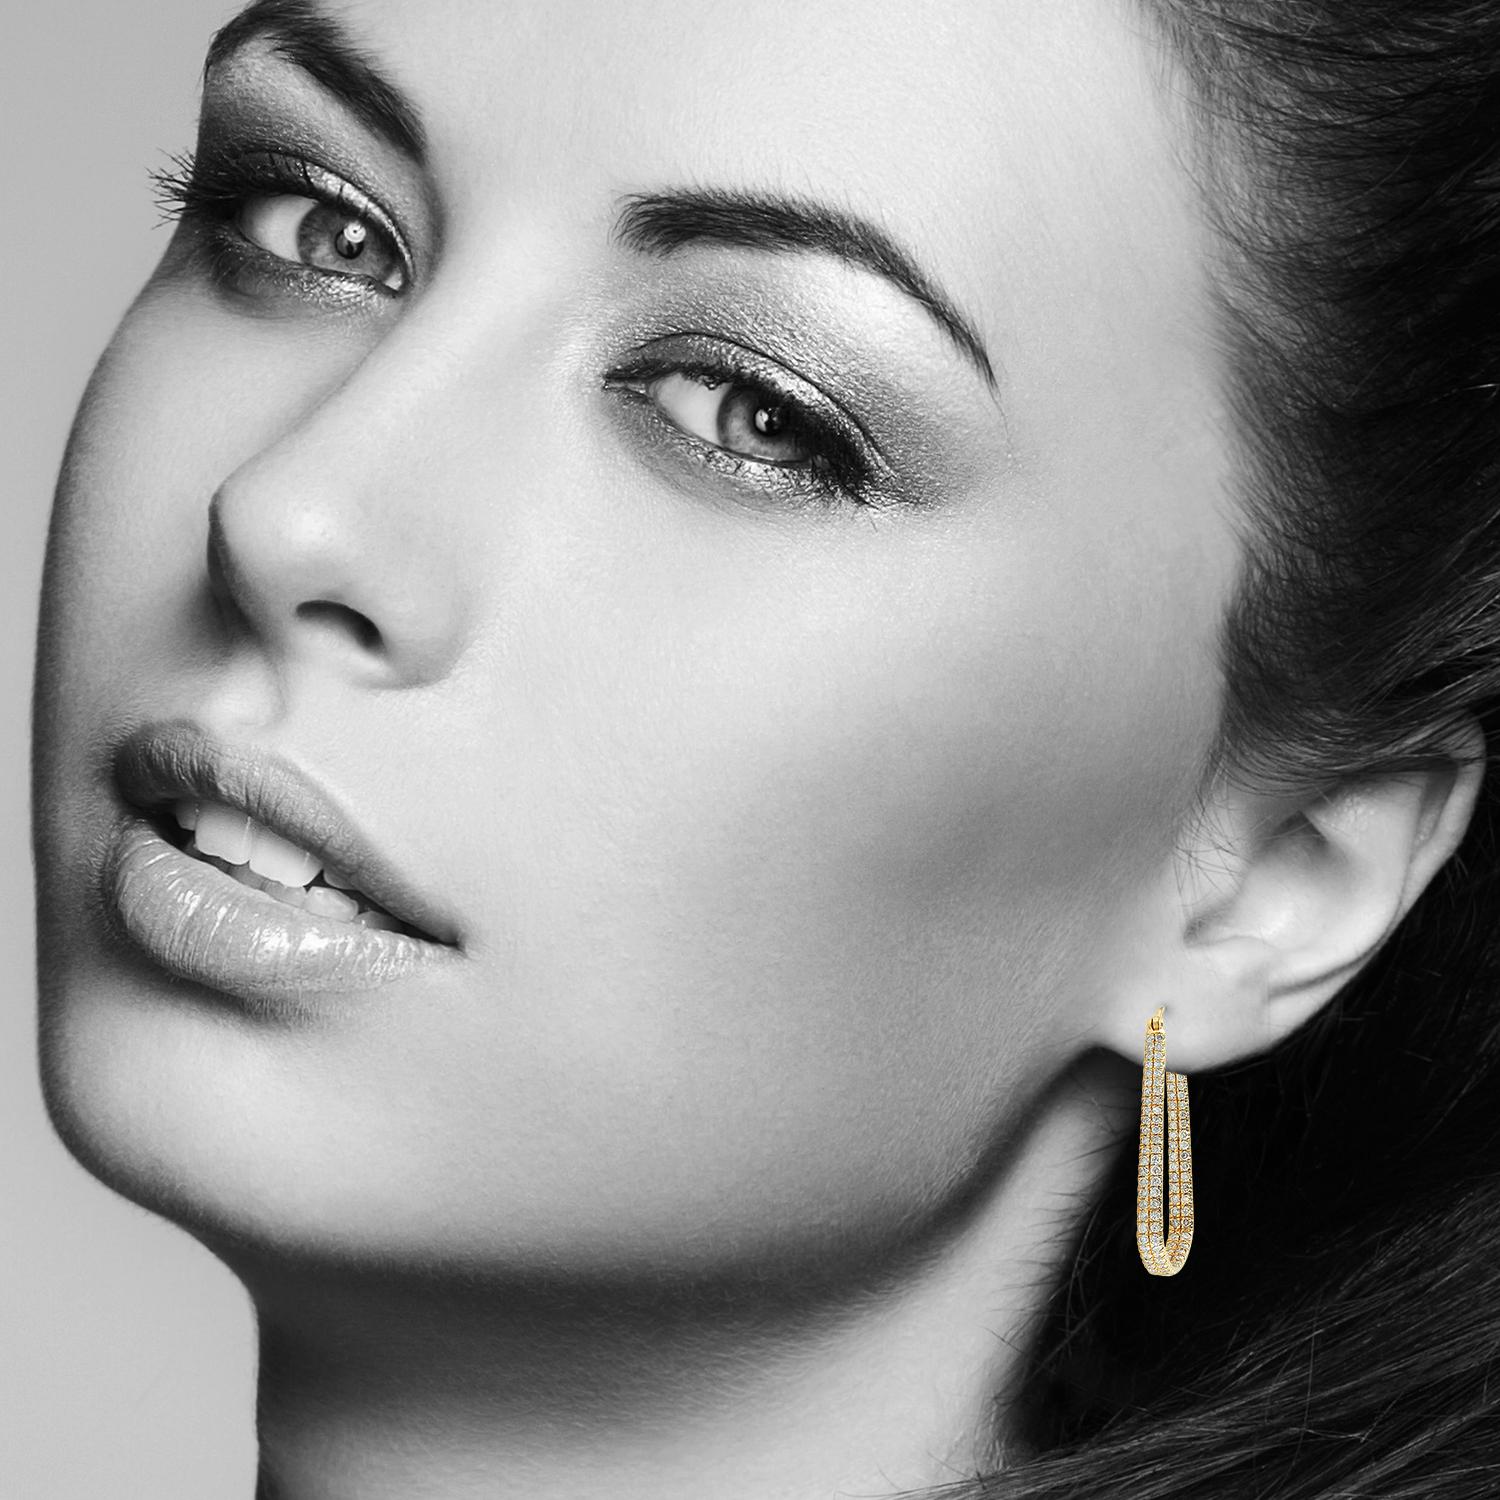 Cast from 18-karat yellow gold, these inside out hoop earrings are hand set with 1.76 carats of pave diamonds.

FOLLOW  MEGHNA JEWELS storefront to view the latest collection & exclusive pieces.  Meghna Jewels is proudly rated as a Top Seller on